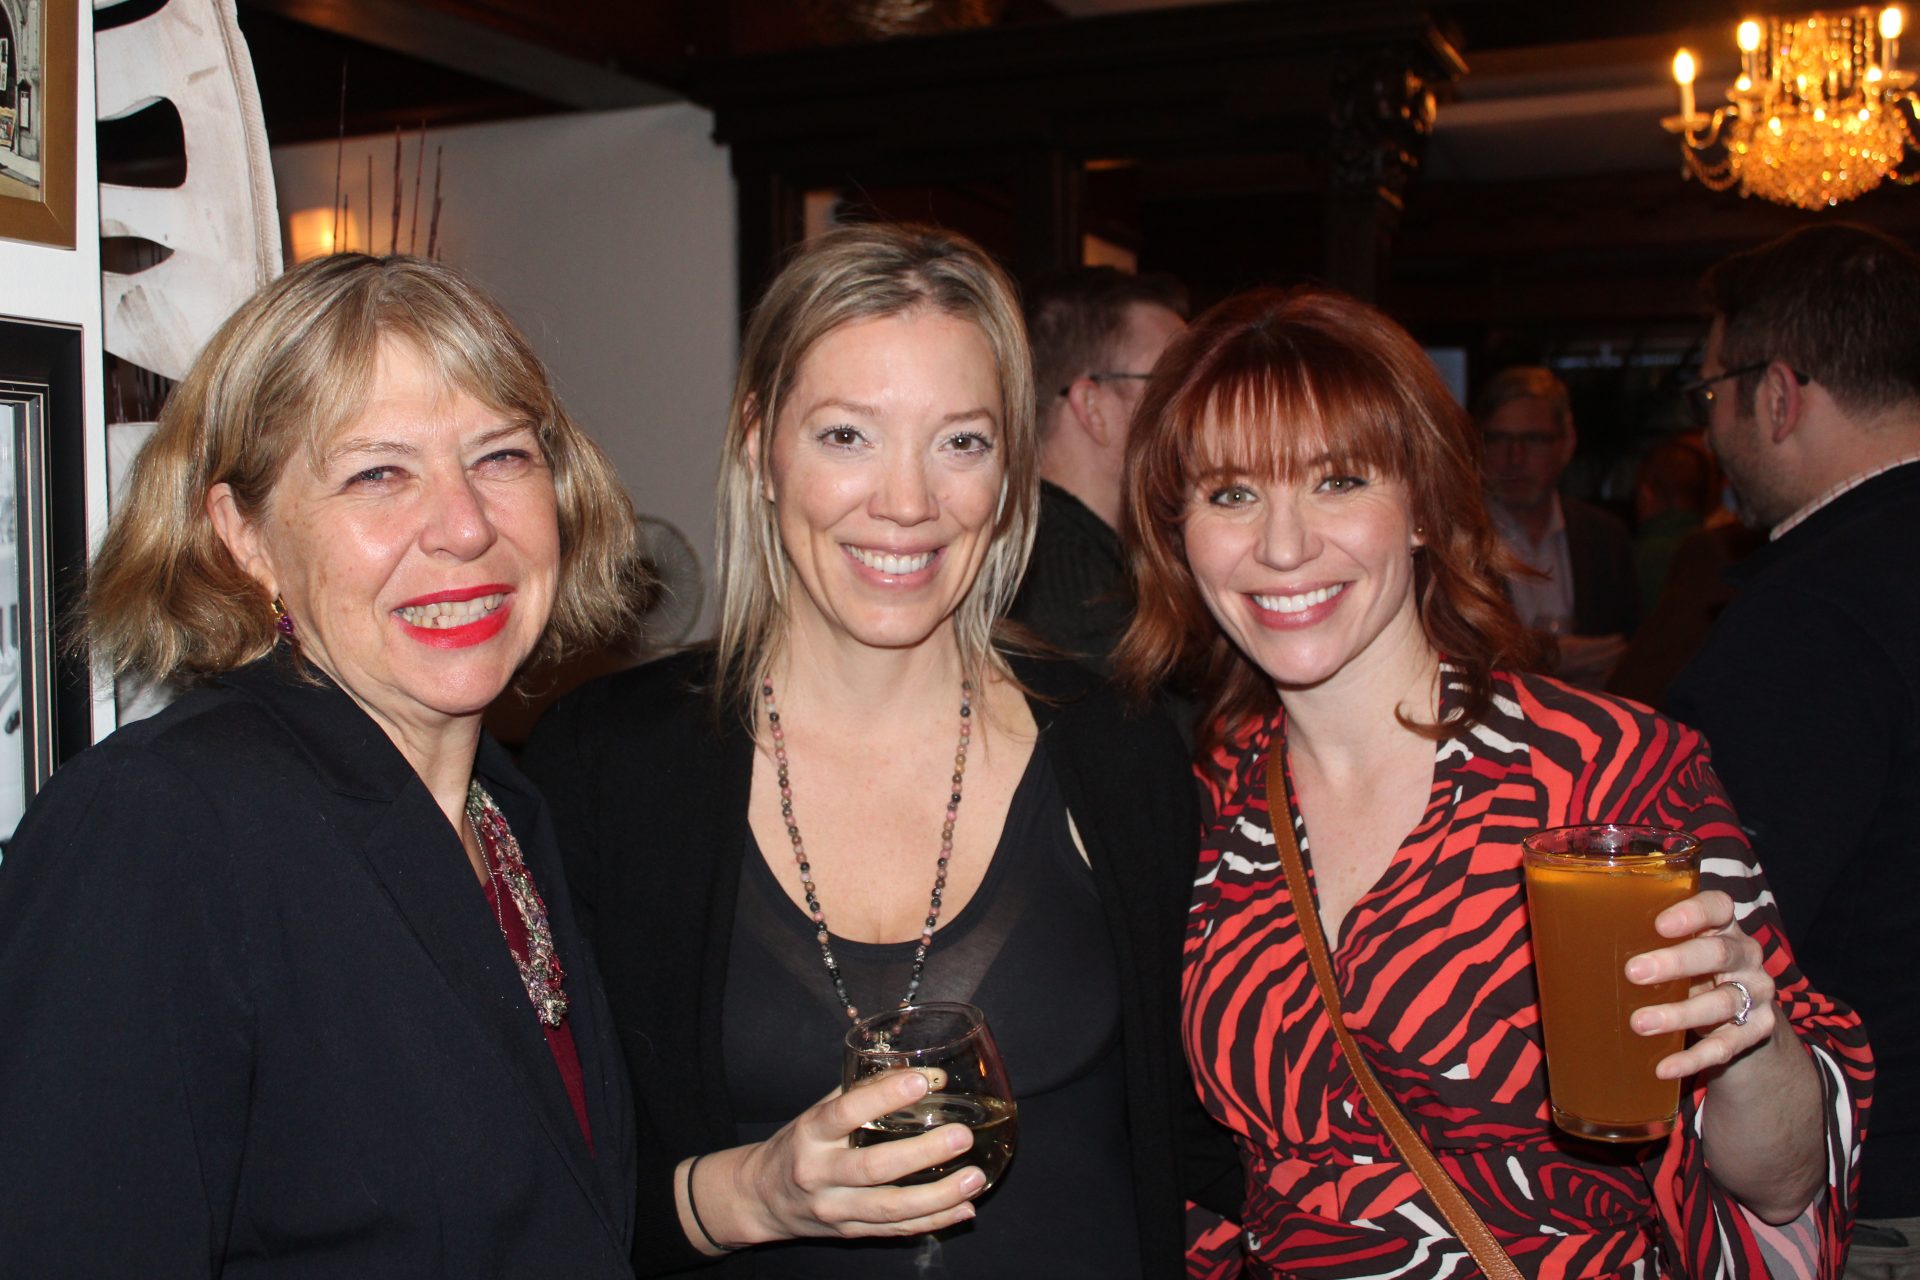 Ottawa City Councillor Theresa Kavanagh, left; and Shirlee Engle, right, public affairs counsellor Compass Rose; pose for a photo with  NDP's official bartender Julie McCarthy's at her surprise going away party on March 7, at Mozaik Street Foodery above Mulligans Golf Bar.